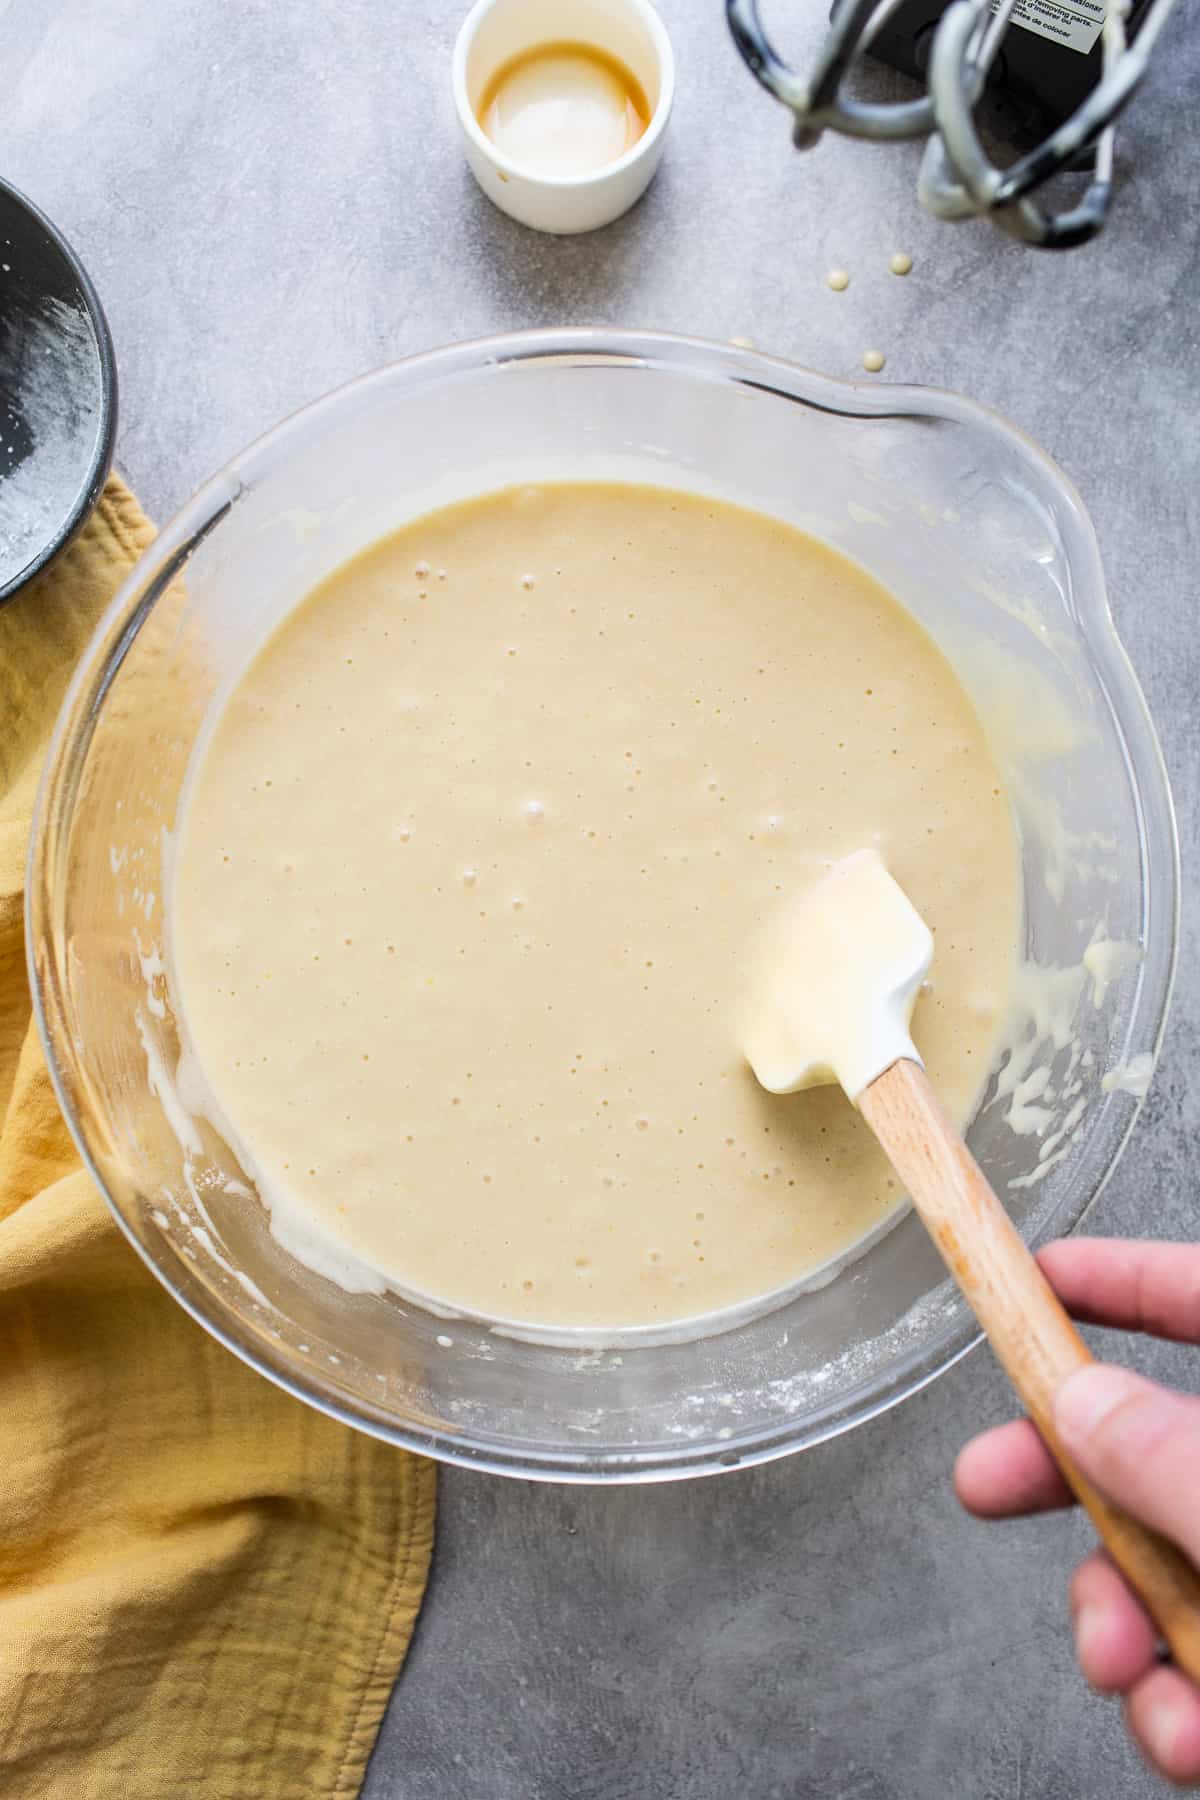 Fully mixed cortadillo cake batter before being poured into a pan.